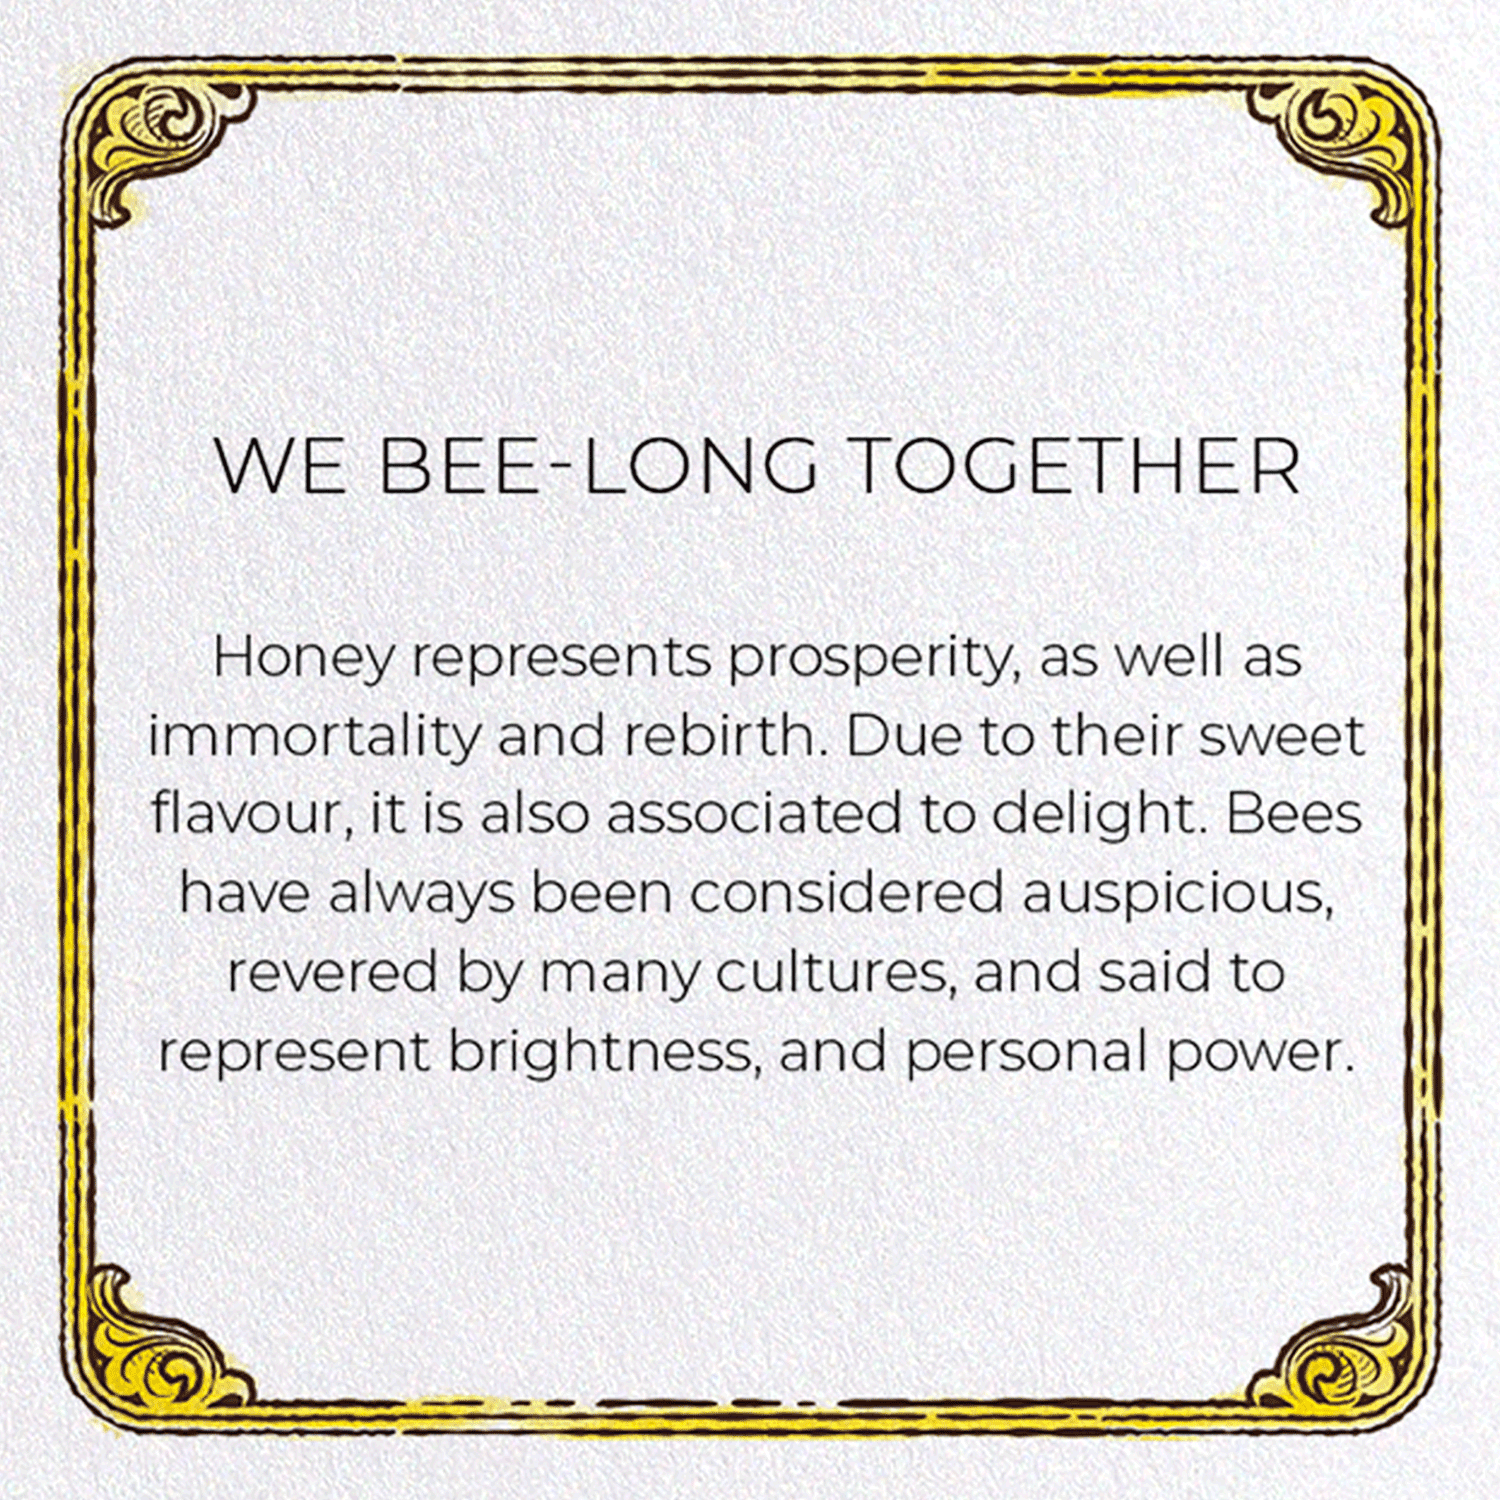 WE BEE-LONG TOGETHER: Victorian Greeting Card